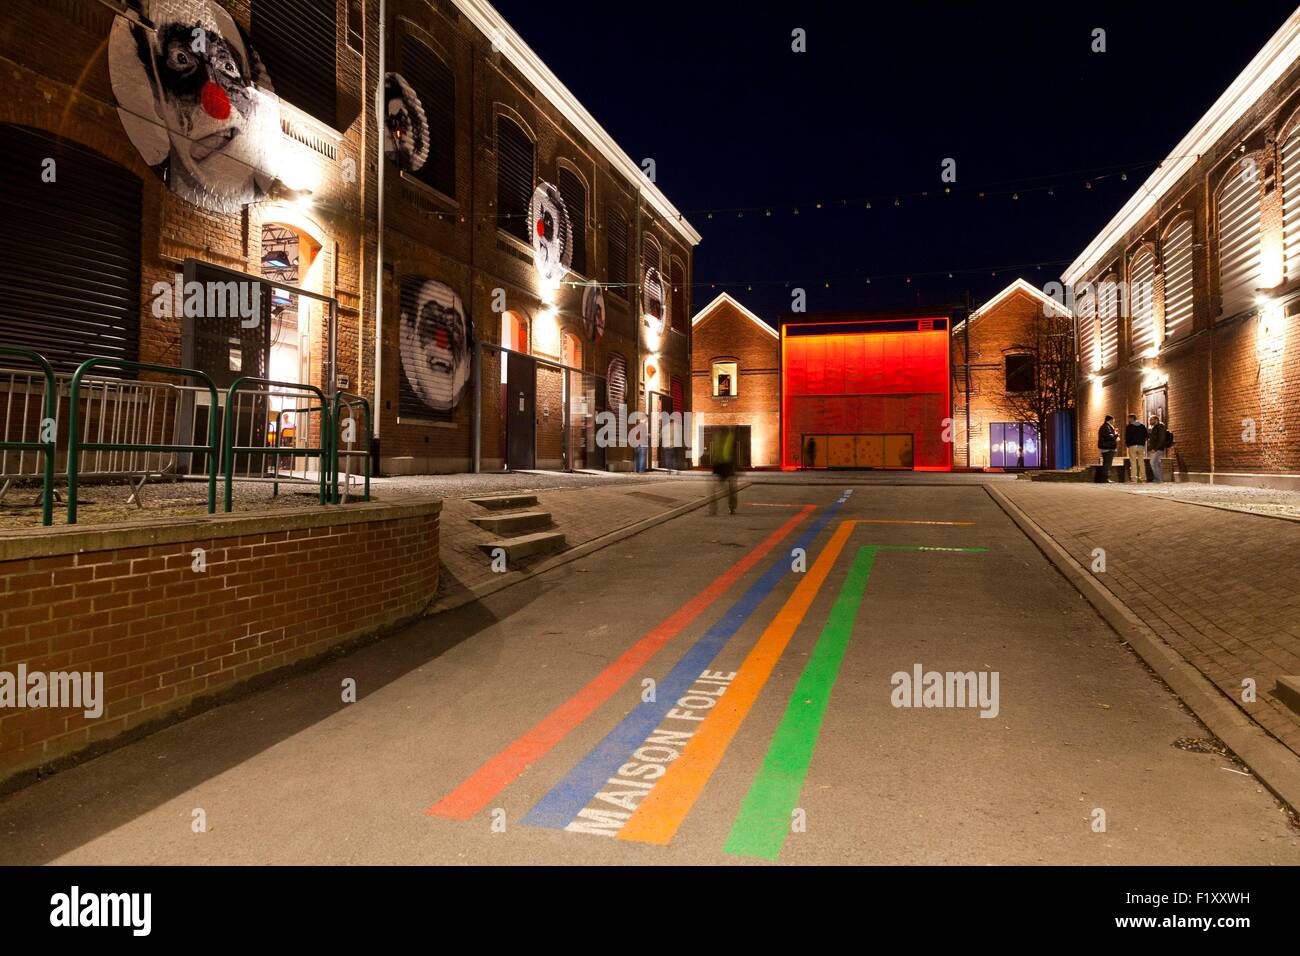 Belgium, Wallonia, Hainaut province, Mons, European Capital of Culture 2015, house madness, cultural place to support cultural projects Stock Photo